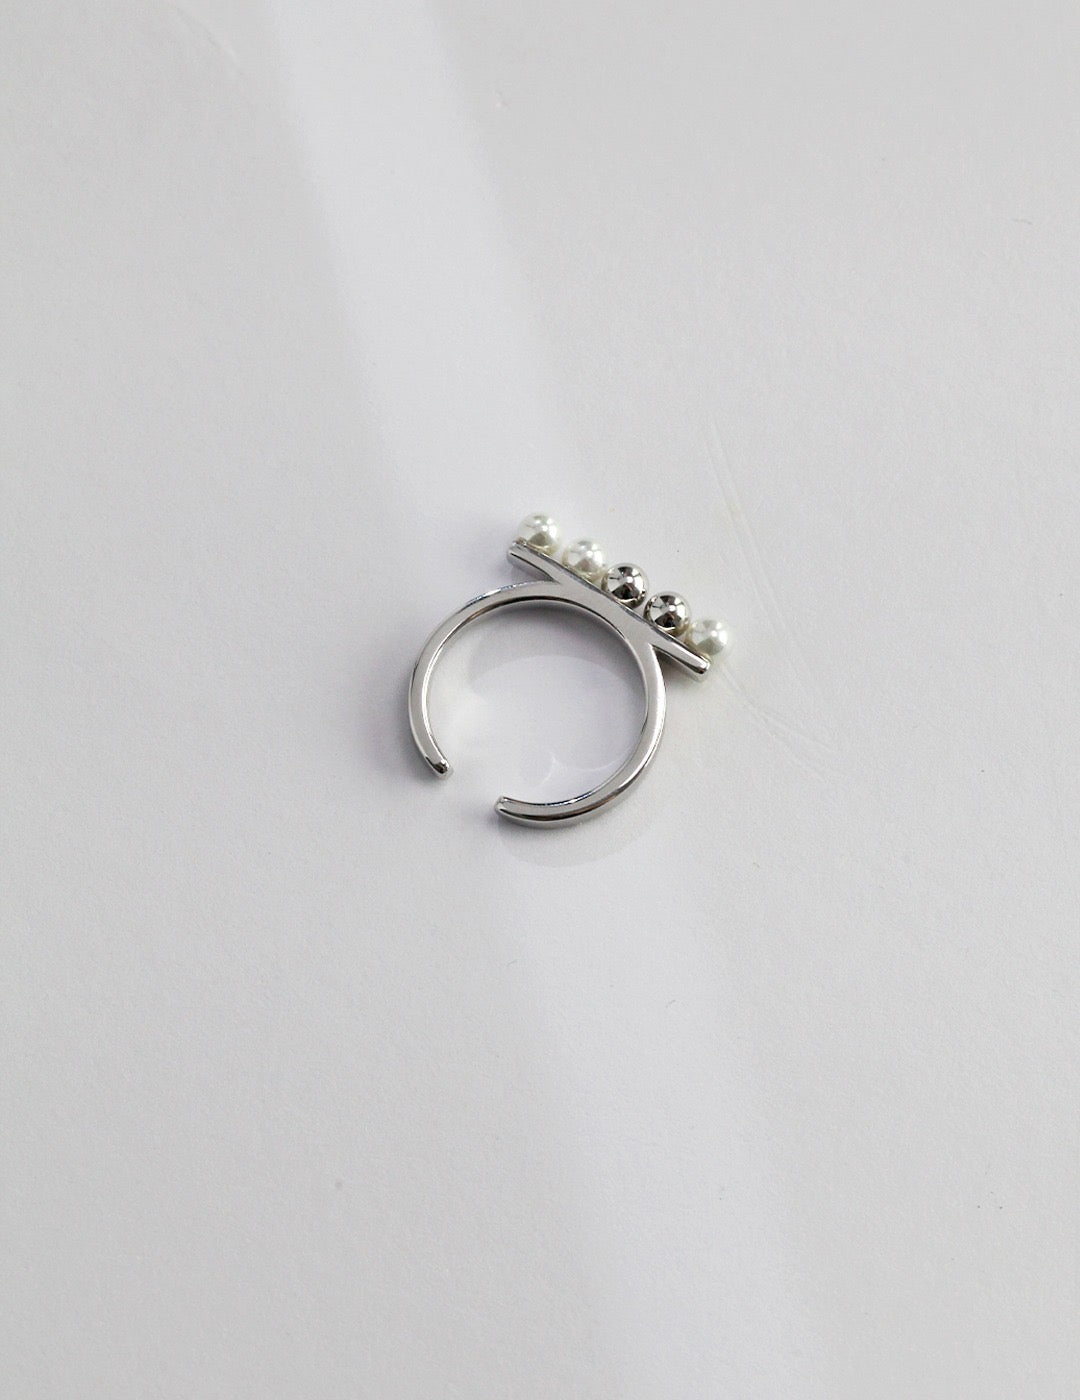 Shell Pearl Ring,Adjustable Size Ring, Unique Ring